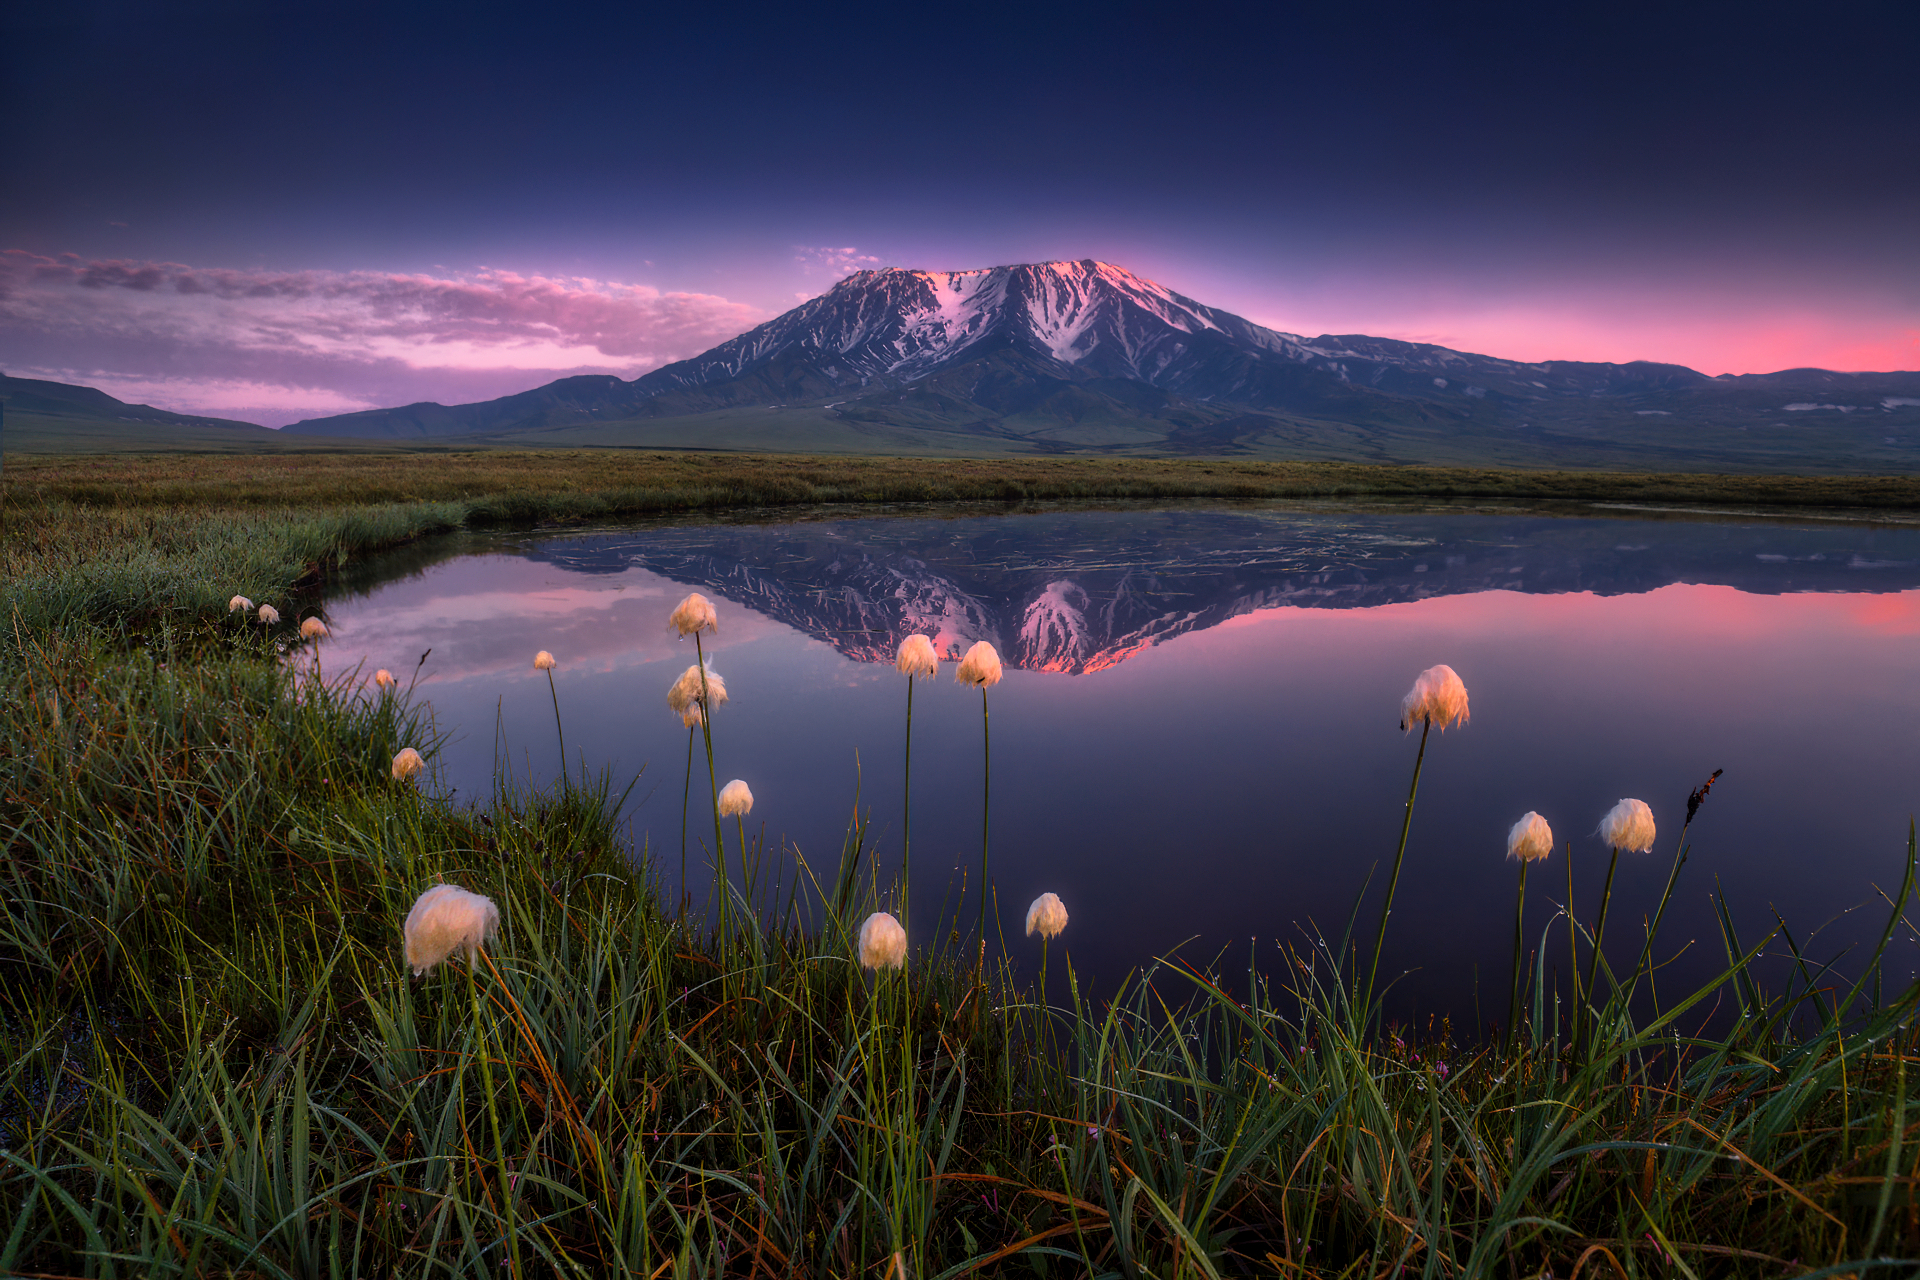 General 1920x1280 flowers grass water mountains landscape nature photography night outdoors